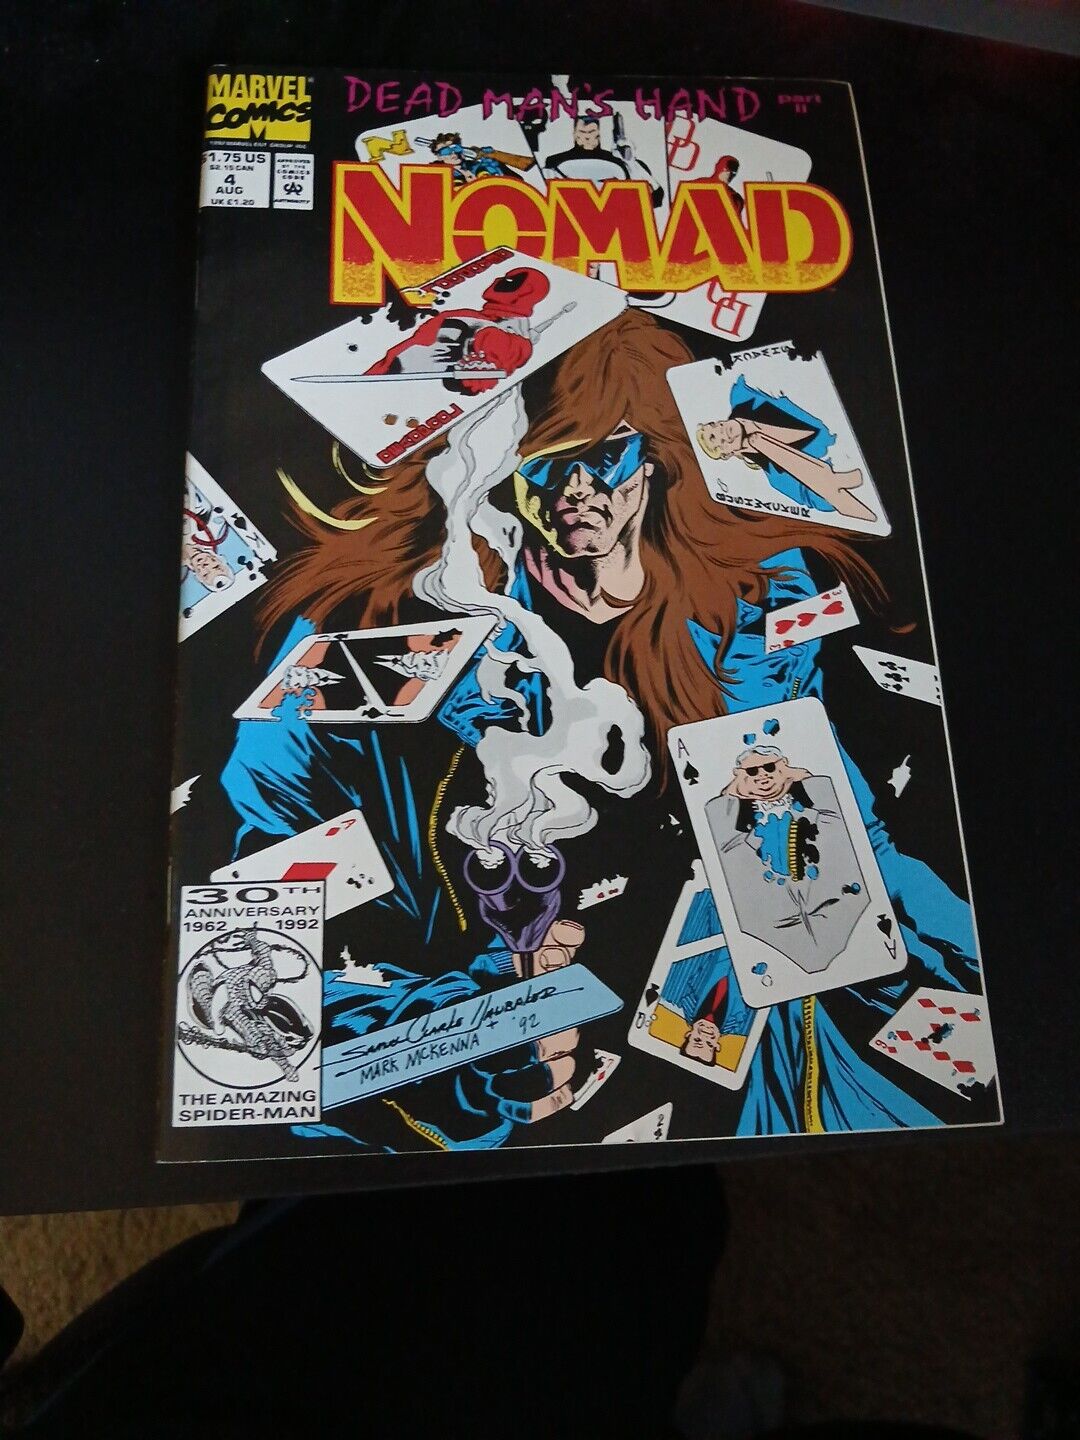 Nomad: Dead Mans Hand Part Two #4